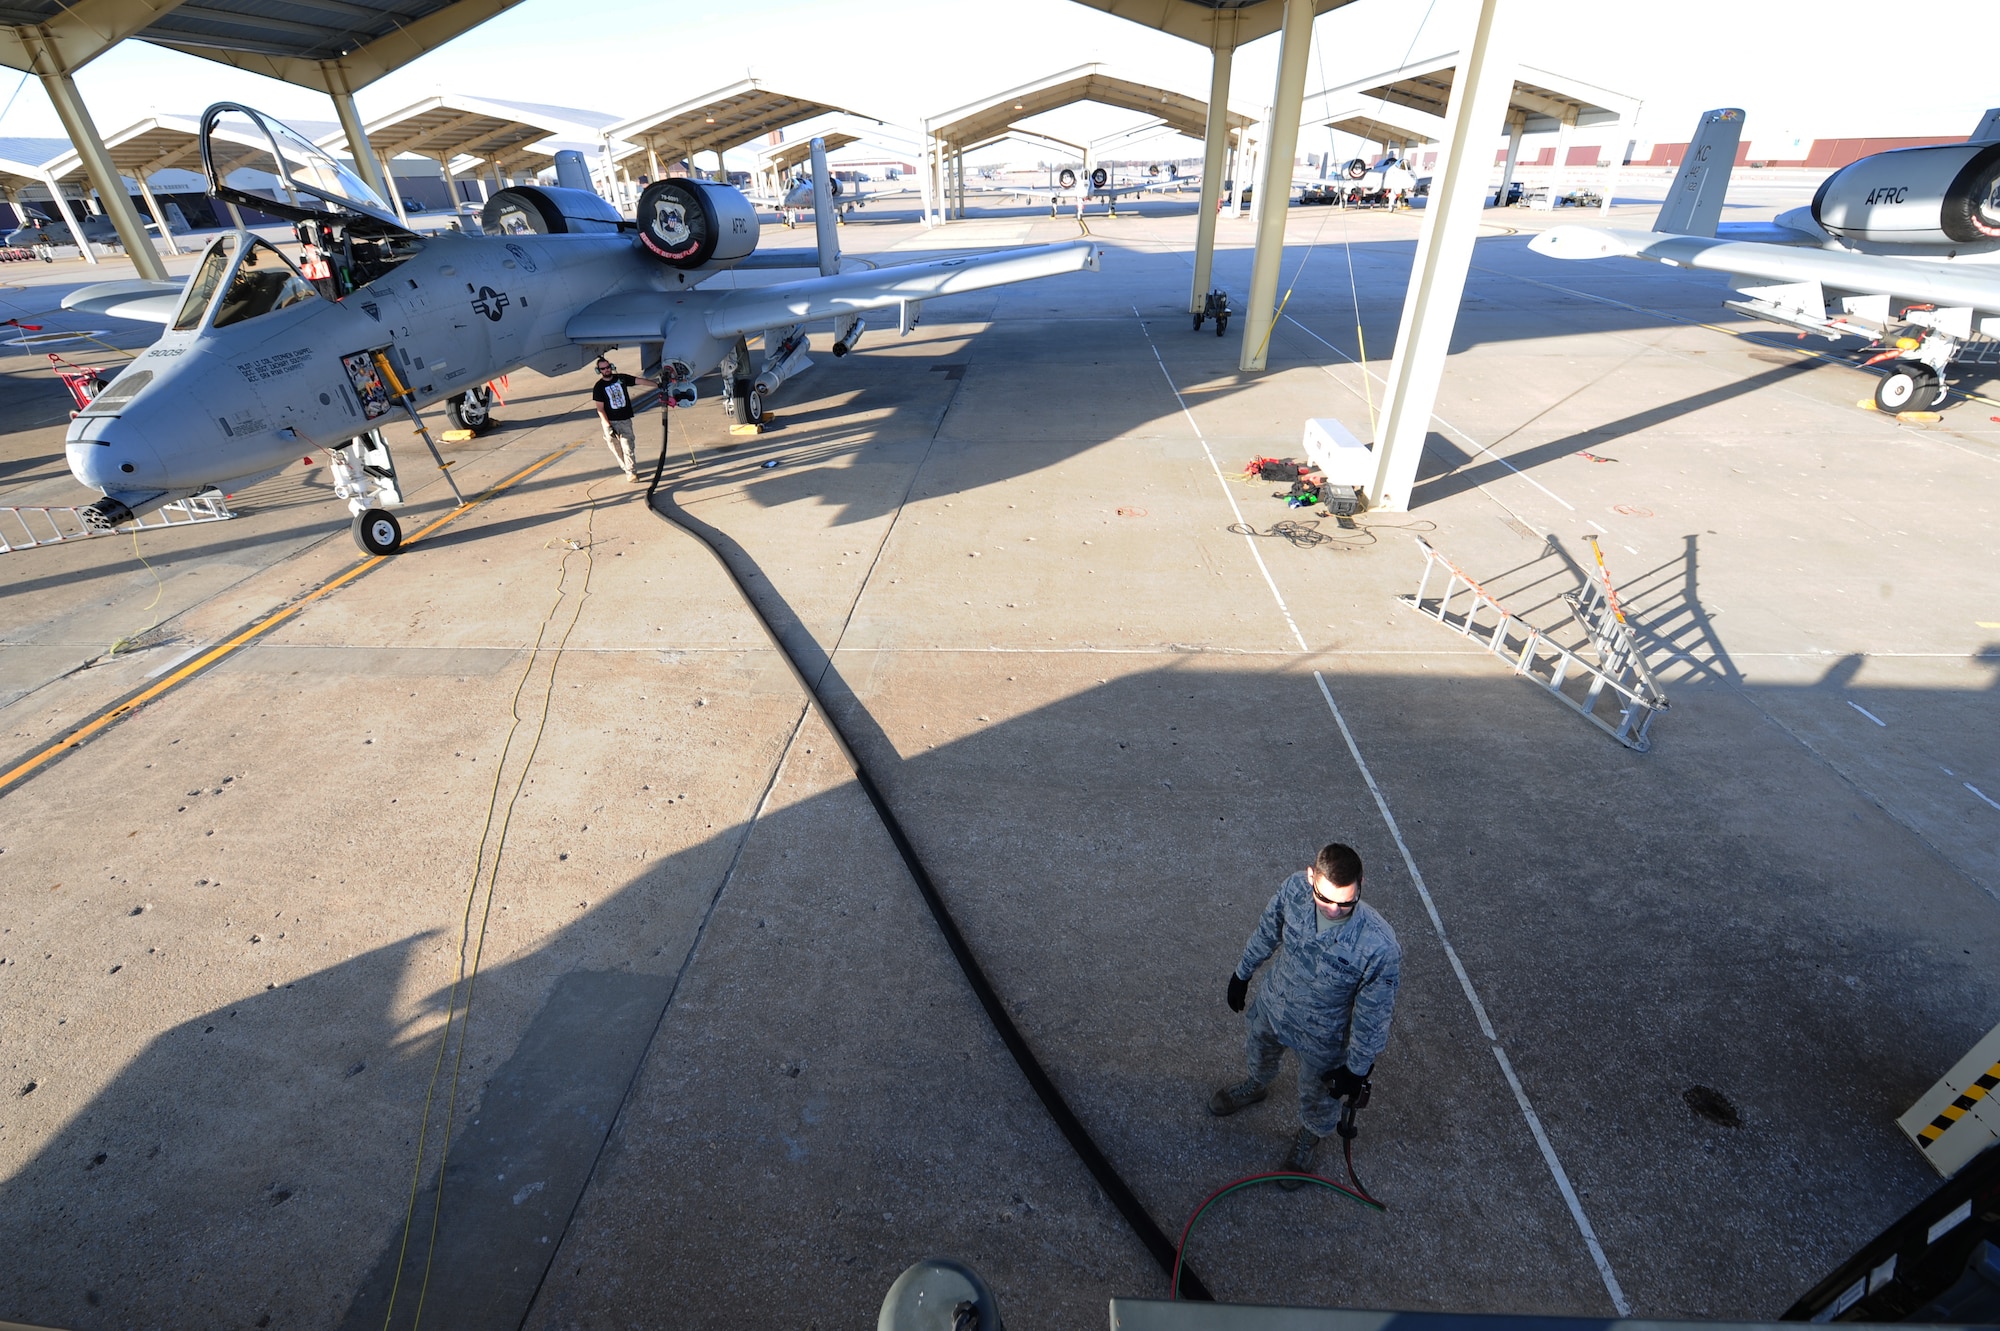 U.S. Air Force Airman 1st Class Jacob McSheffrey, a 509th Logistics Readiness Squadron fuels distribution operator, fuels an A-10 Thunderbolt II at Whiteman Air Force Base, Mo., Nov. 3, 2015. The fuels shop mission is to ensure aircraft, vehicles and equipment receive fuel with a minimal amount of water and contains no contaminants. (U.S. Air Force photo by Senior Airman Keenan Berry)